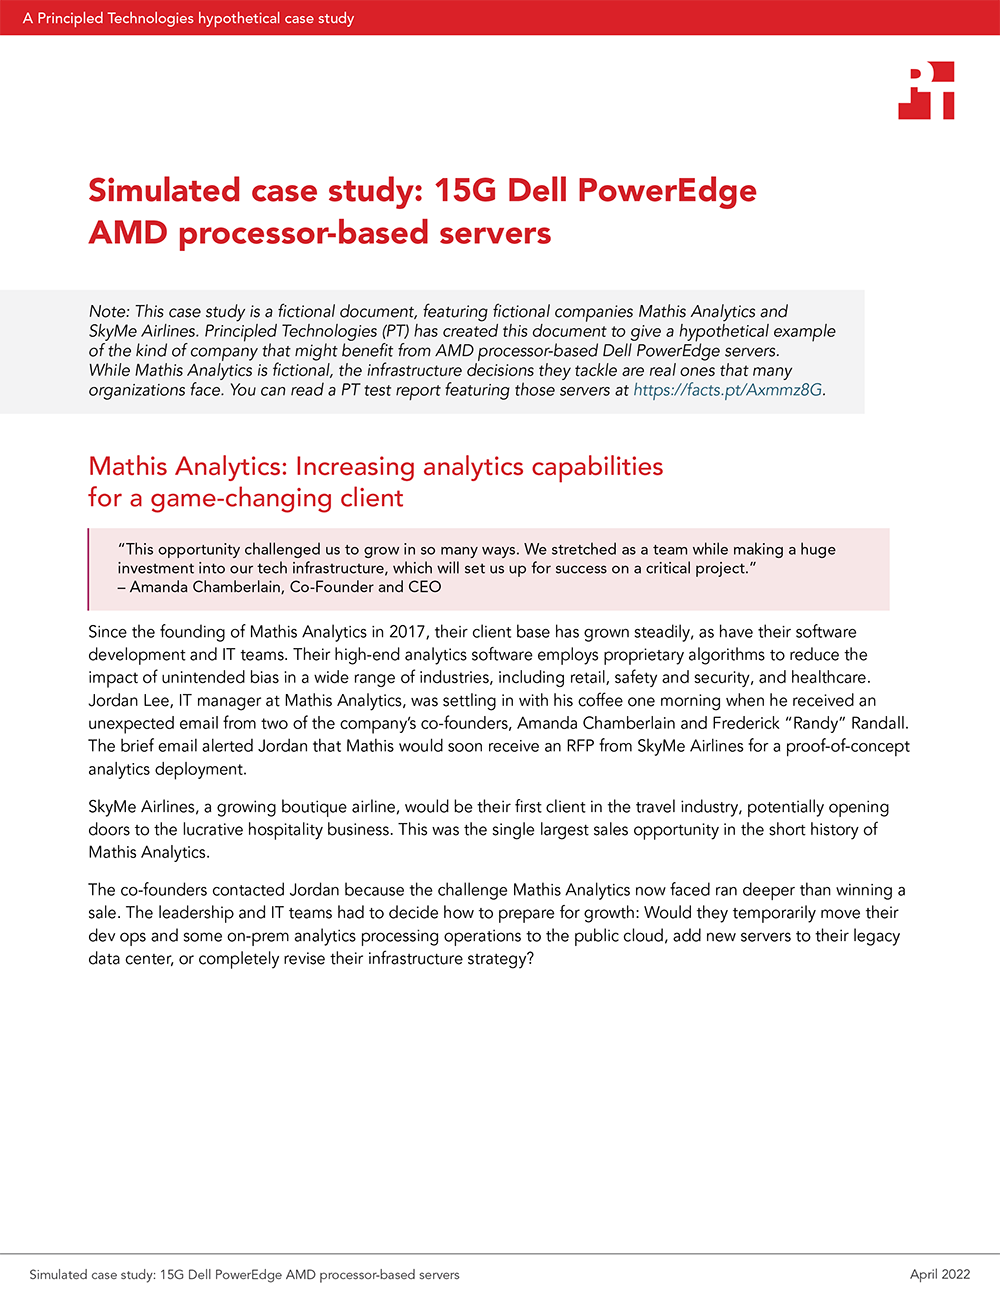 Simulated case study: 15G Dell PowerEdge AMD processor-based servers